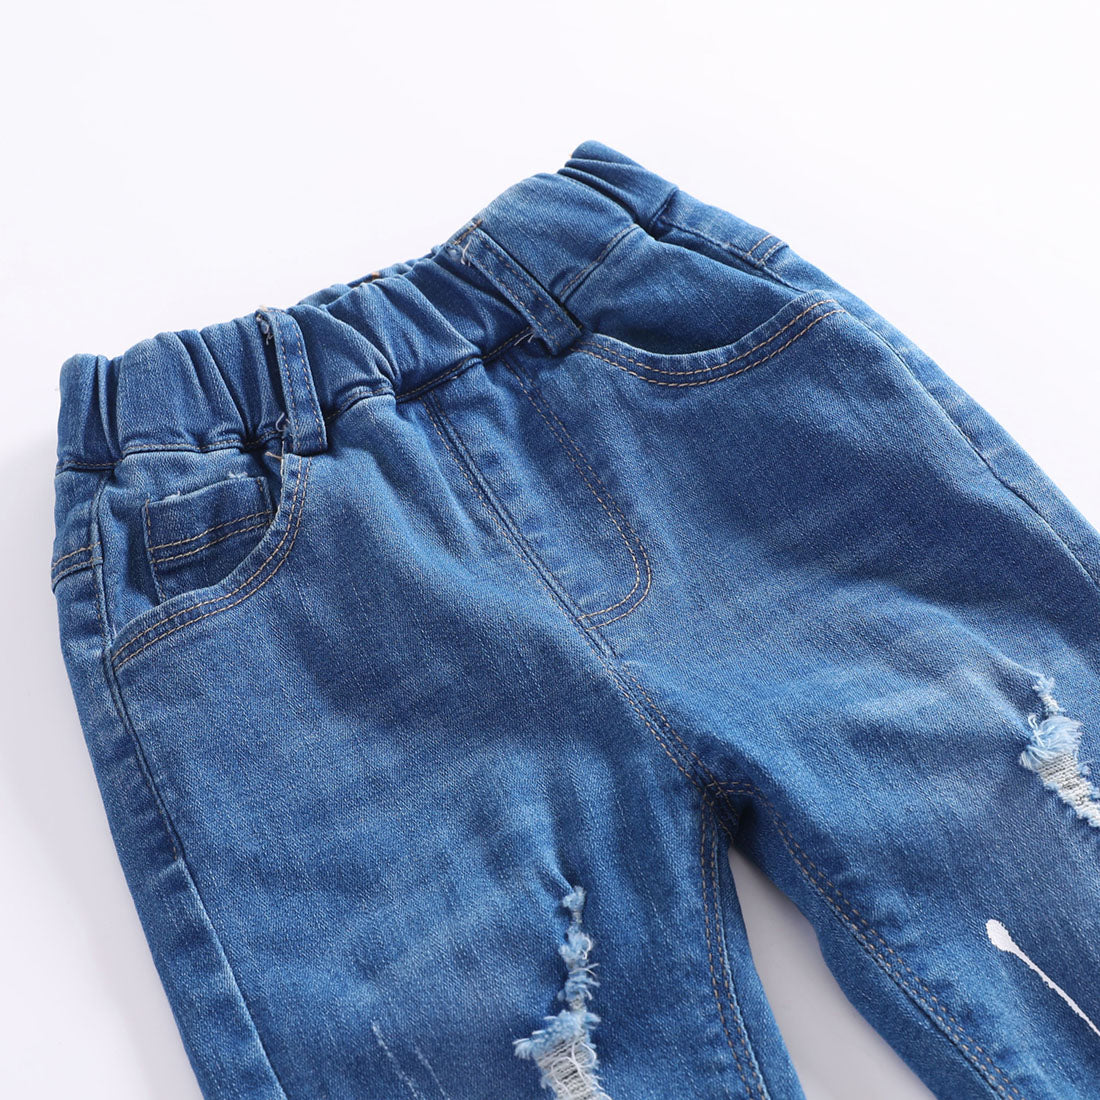 Baby Ripped Jeans Elastic Distressed Denim Pants